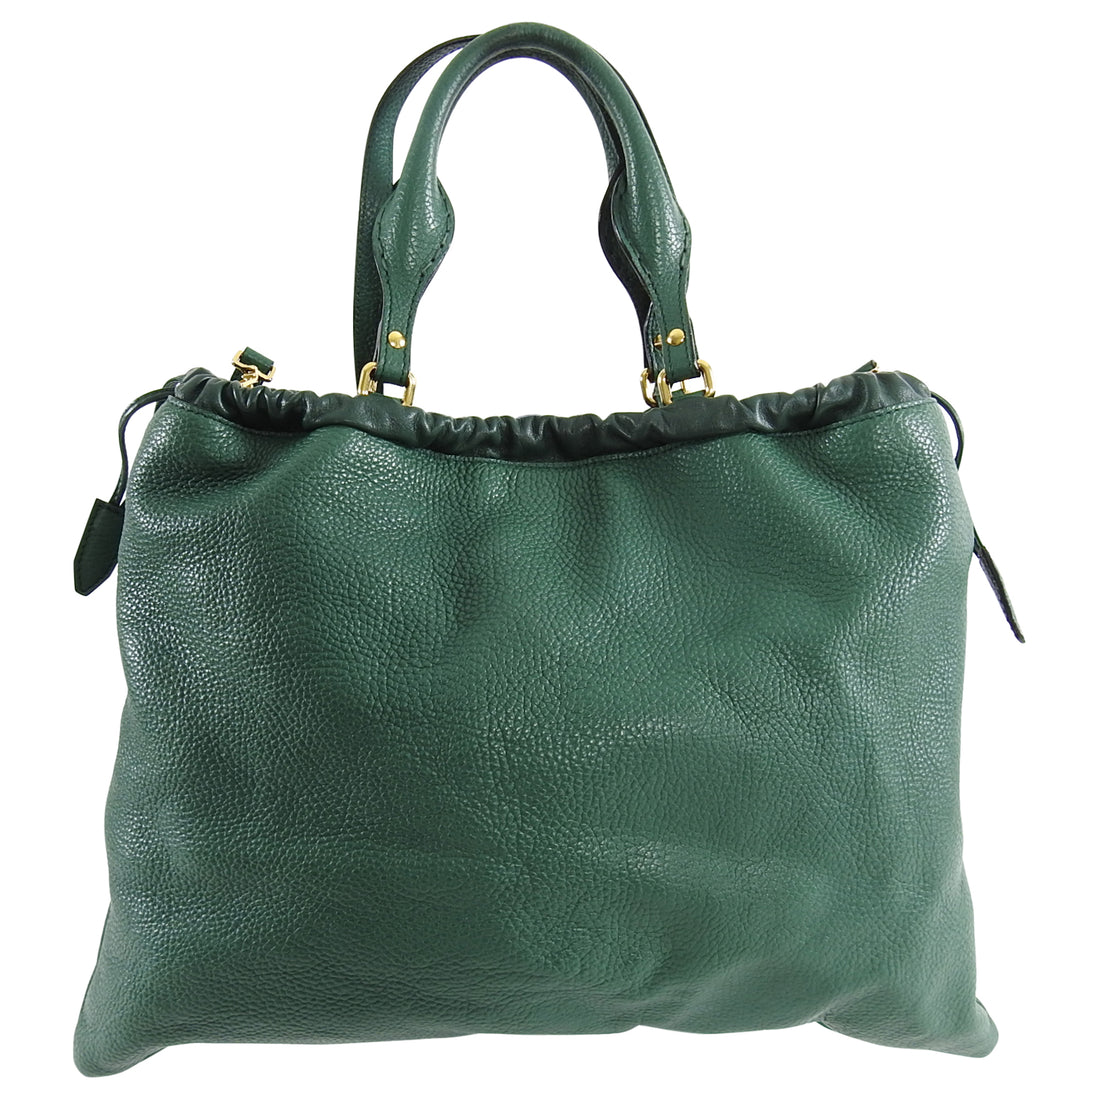 Burberry Green Large Leather Tote Bag with Shoulder Strap